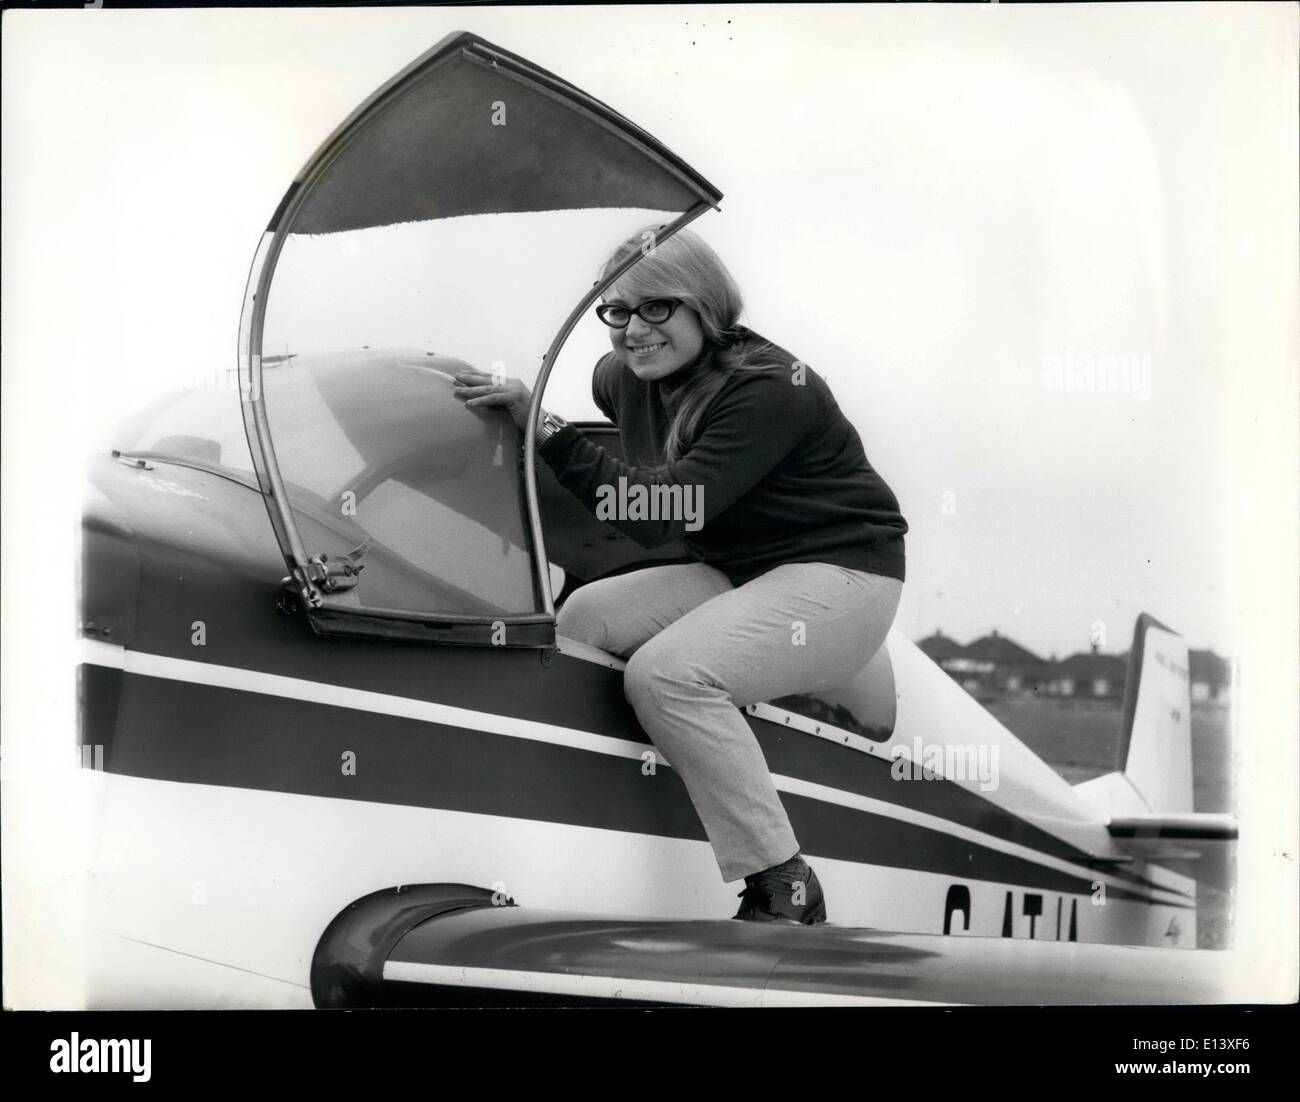 Mar. 27, 2012 - Rosalind climbs into the cockpit for a spin at Rochester Airport.A confident smile for the photographer before she takes off. Stock Photo